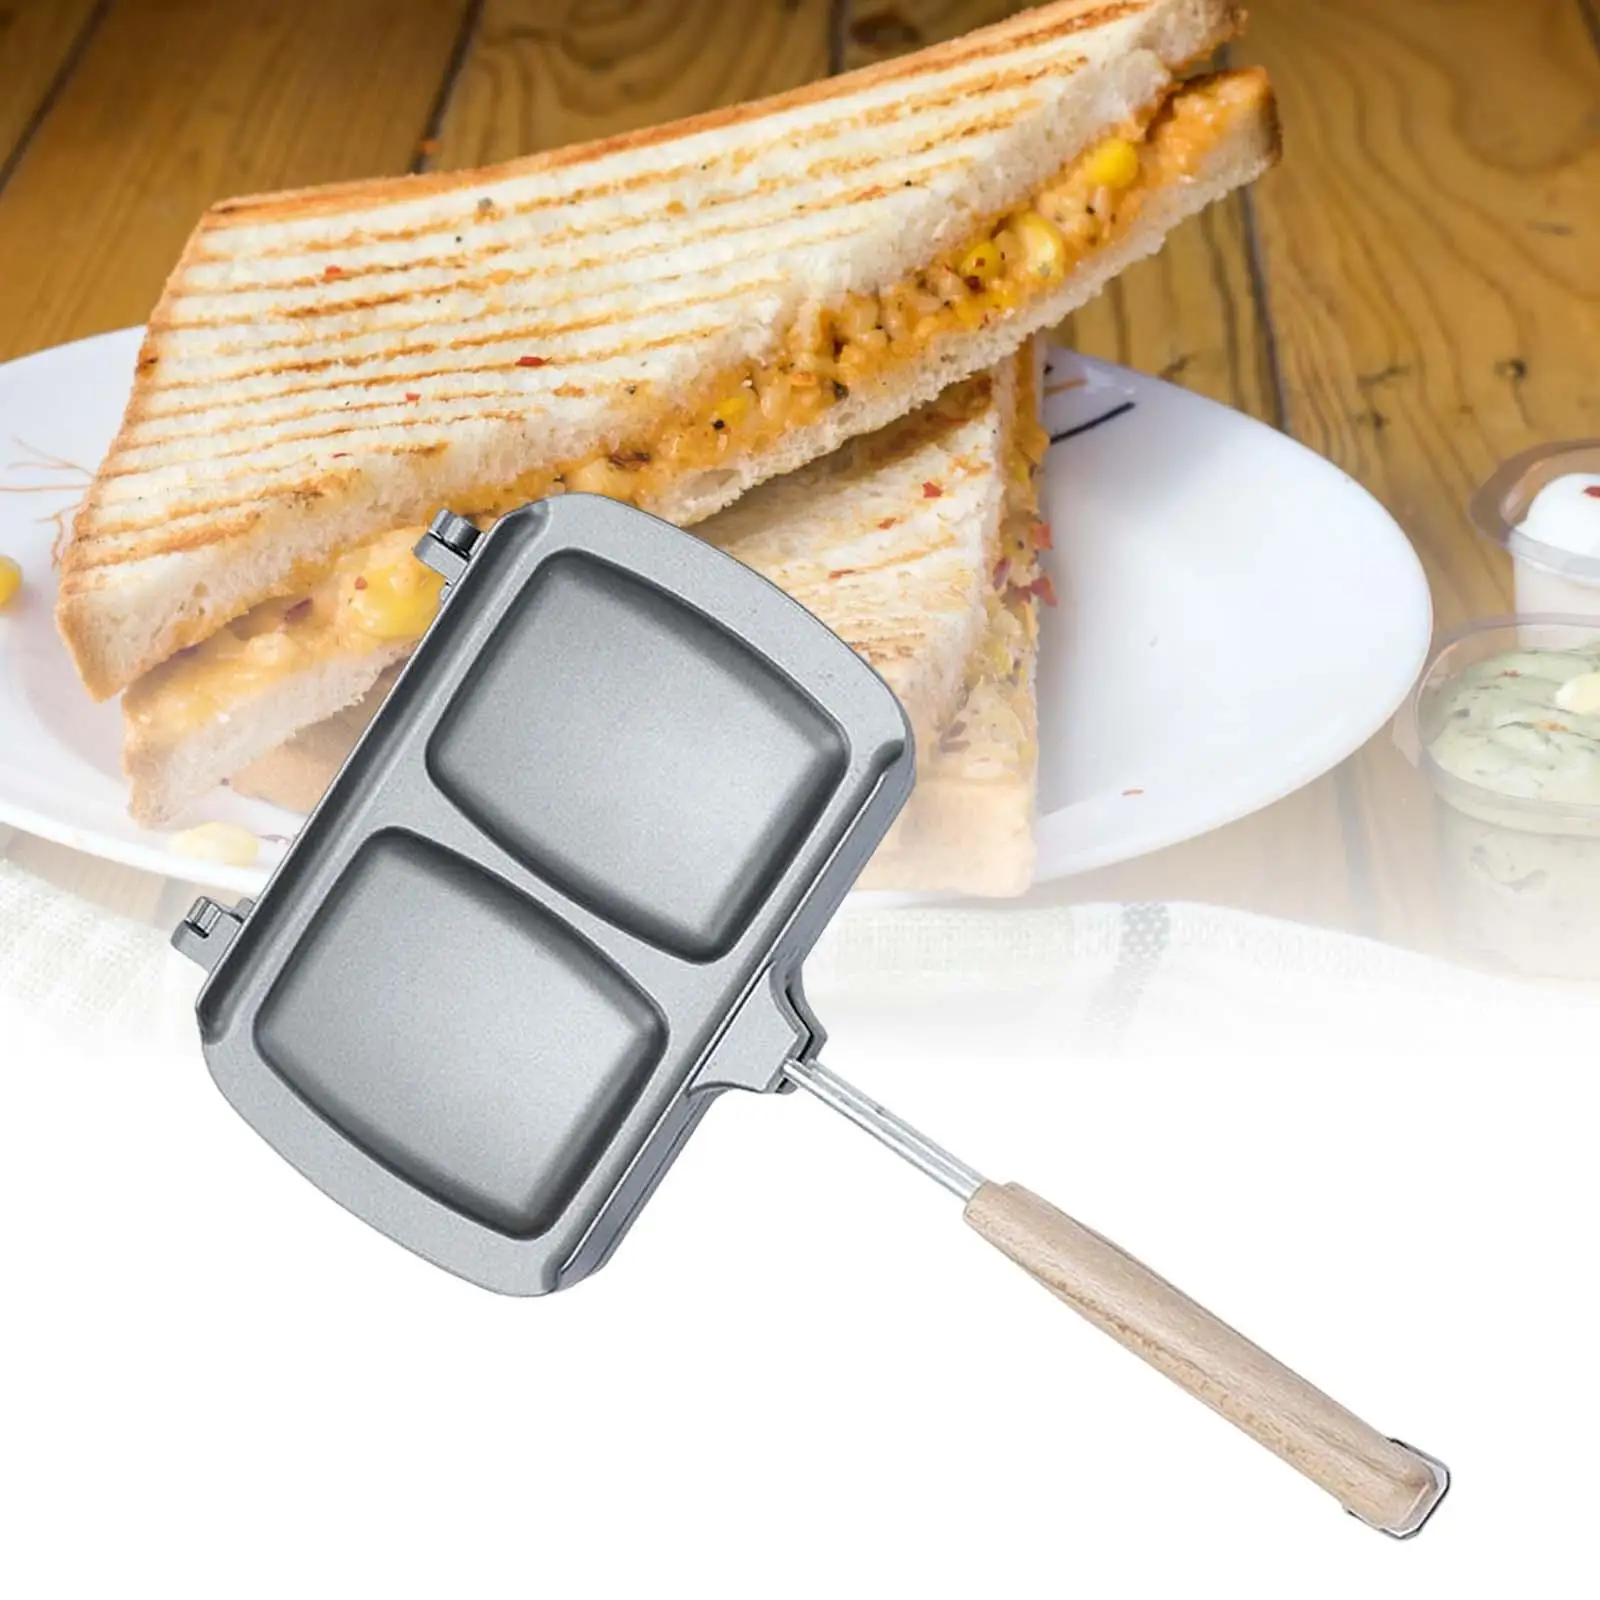 Bread Toast Maker Non Stick Grill Pan Double Sided Heating Frying Egg Ham Sandwiches Maker for Induction Cooker Stove Top commercial induction cooker 5000w flat high power hotel canteen electric frying stove large pot induction stove